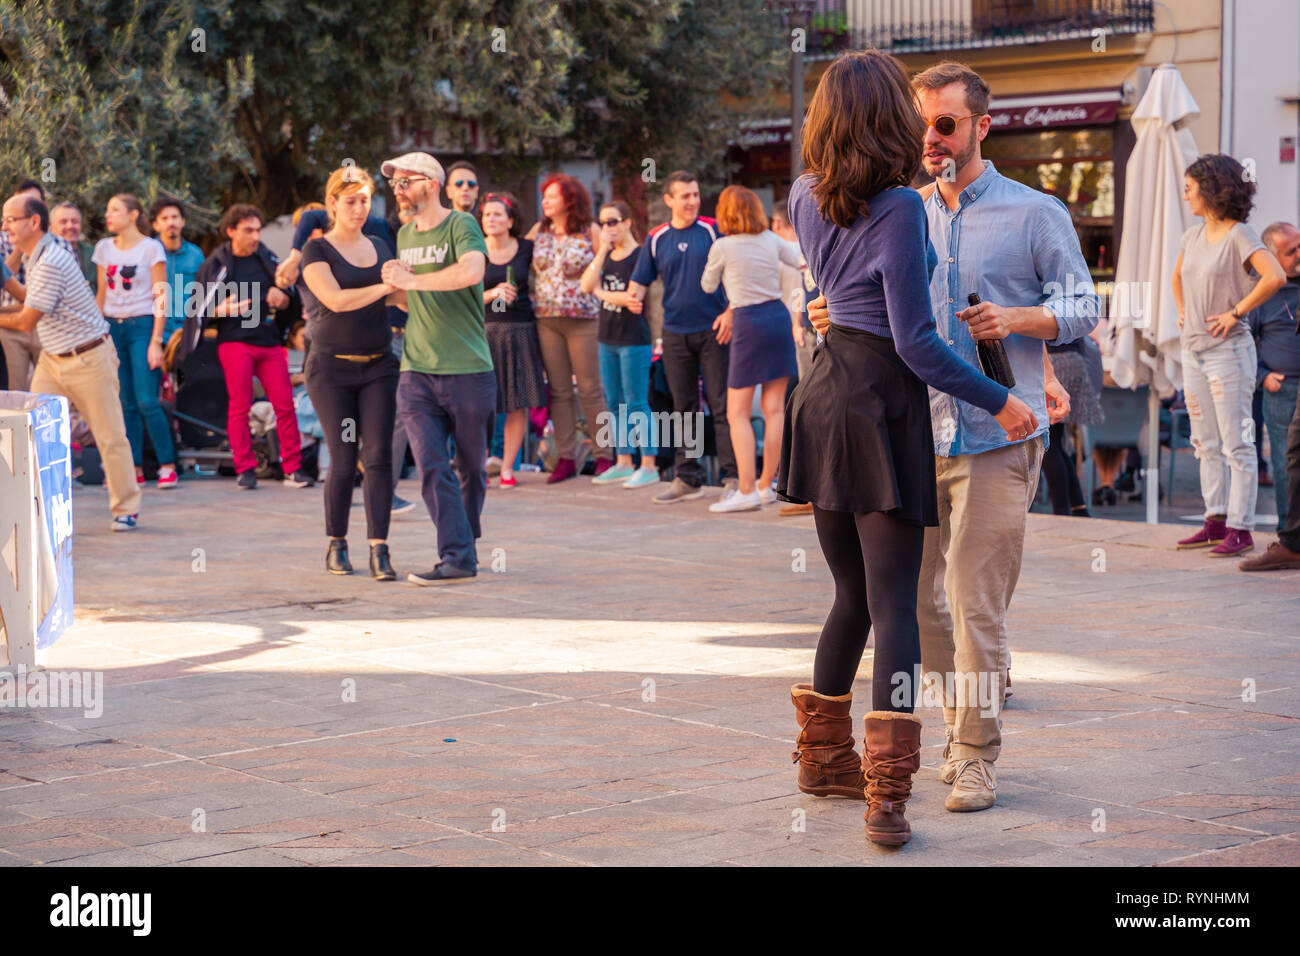 Valencia, Spain; December 2 2018: People dancing on the street during holiday. Young stylish couple dance. Having a good time. Stock Photo